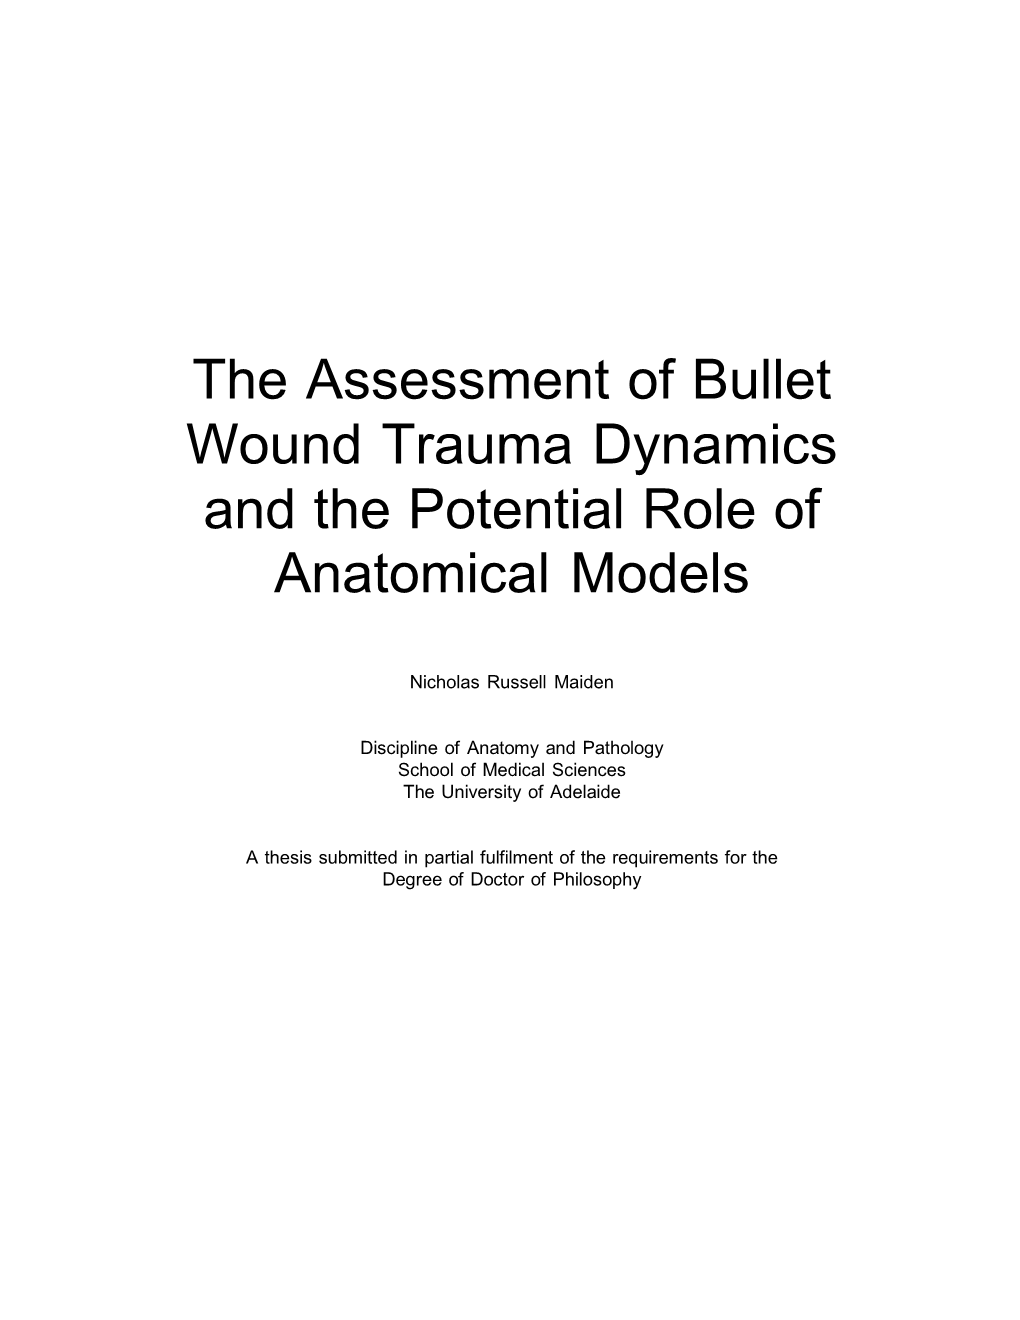 The Assessment of Bullet Wound Trauma Dynamics and the Potential Role of Anatomical Models